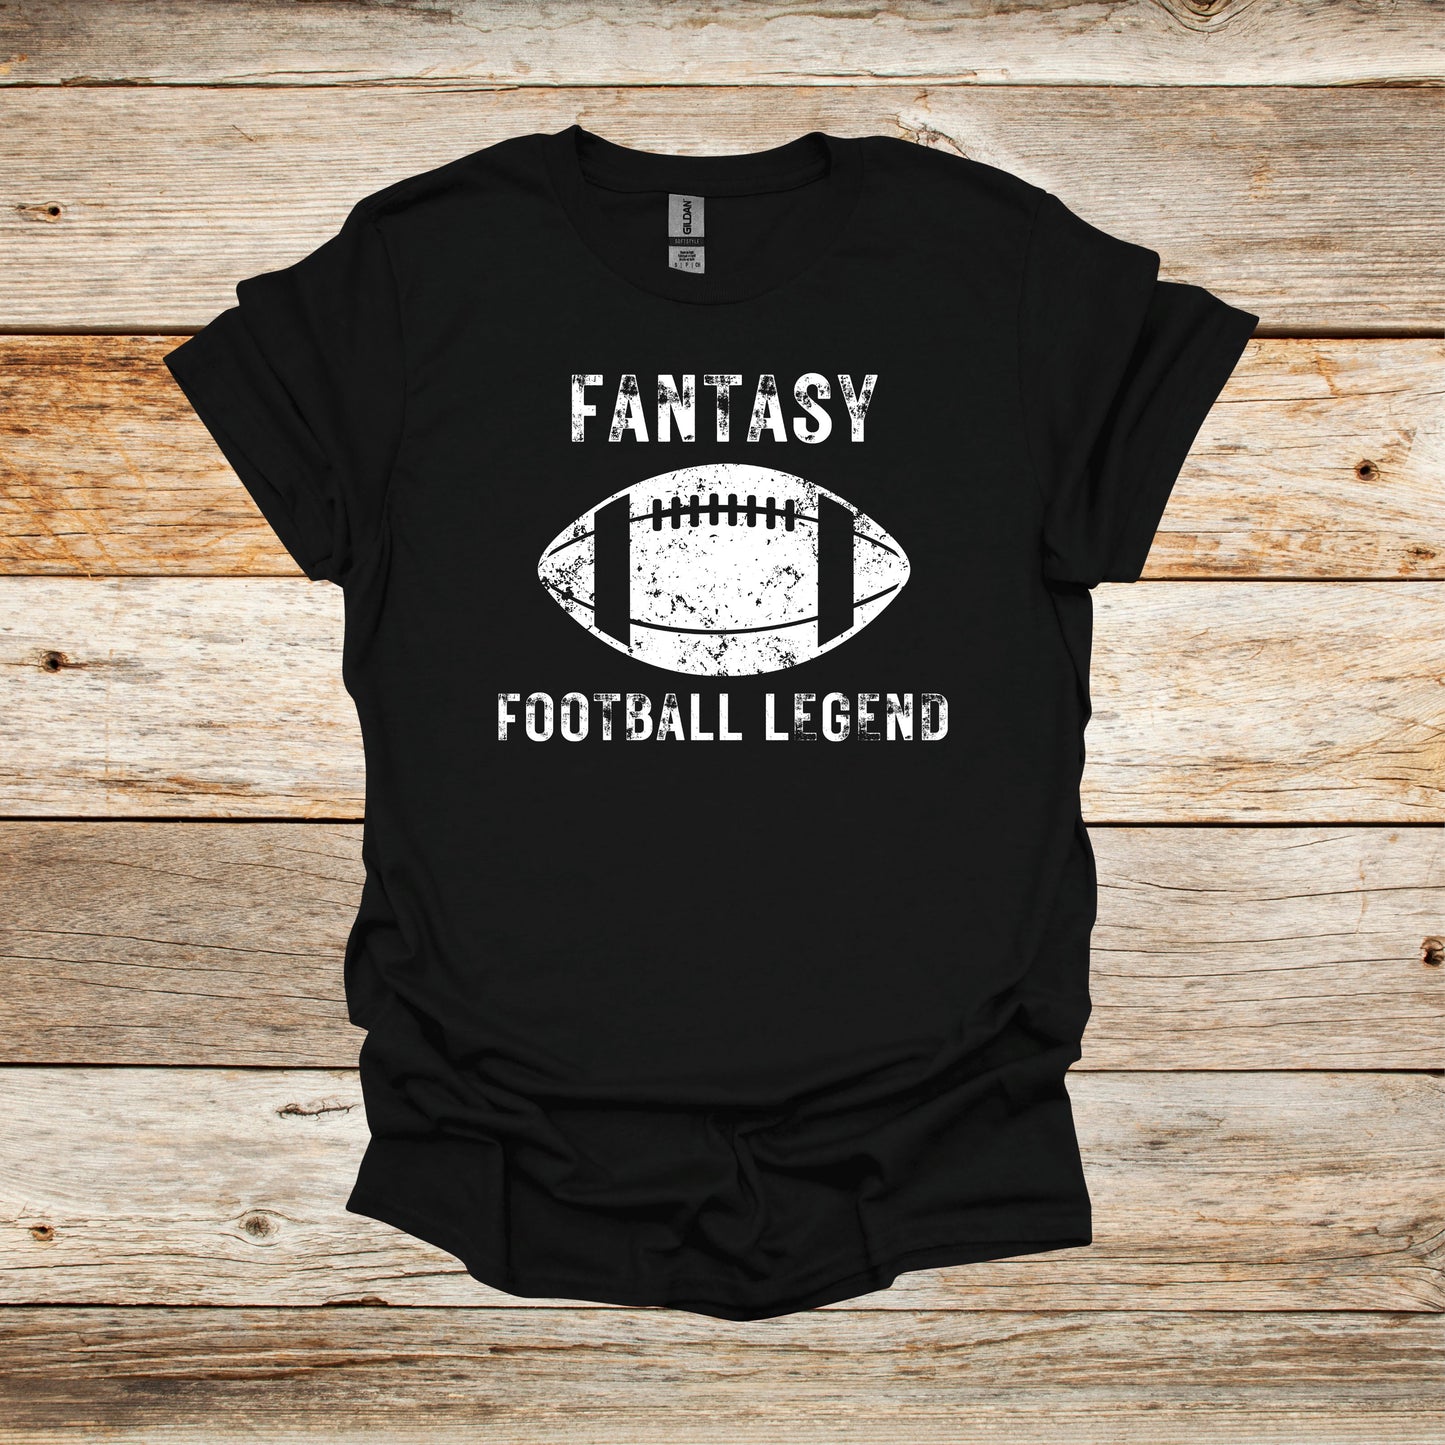 Football T-Shirt - Adult and Children's Tee Shirts - Fantasy Football - Sports T-Shirts Graphic Avenue Black Adult Small 